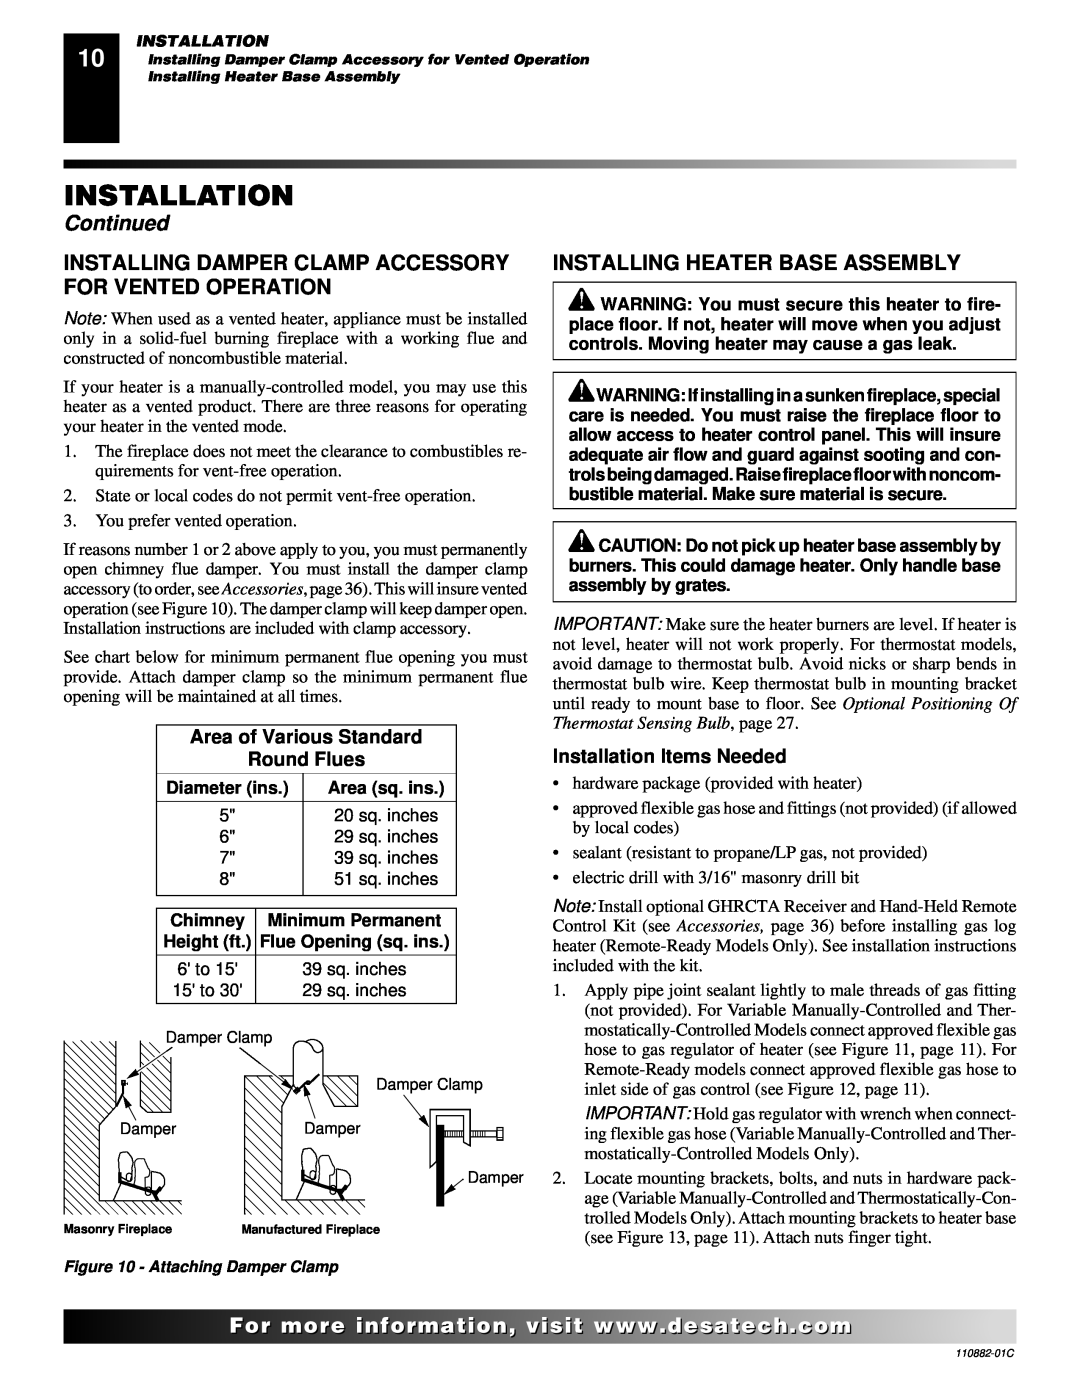 Desa 30, R, V, T installation manual Continued, Area of Various Standard Round Flues, Installation Items Needed 